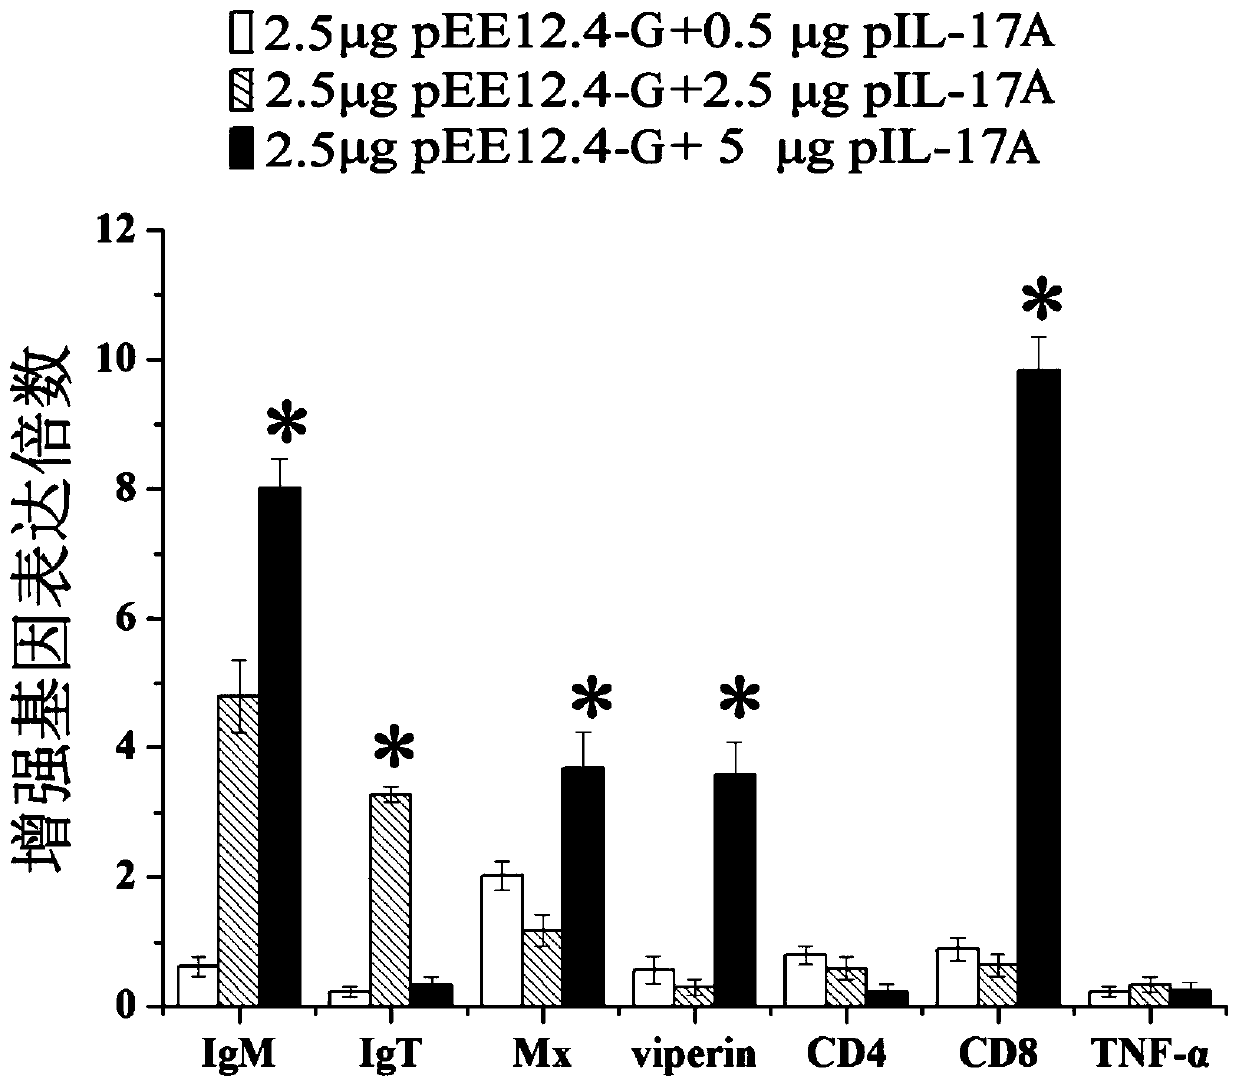 Application of il-17a protein in preparation of animal vaccine adjuvant